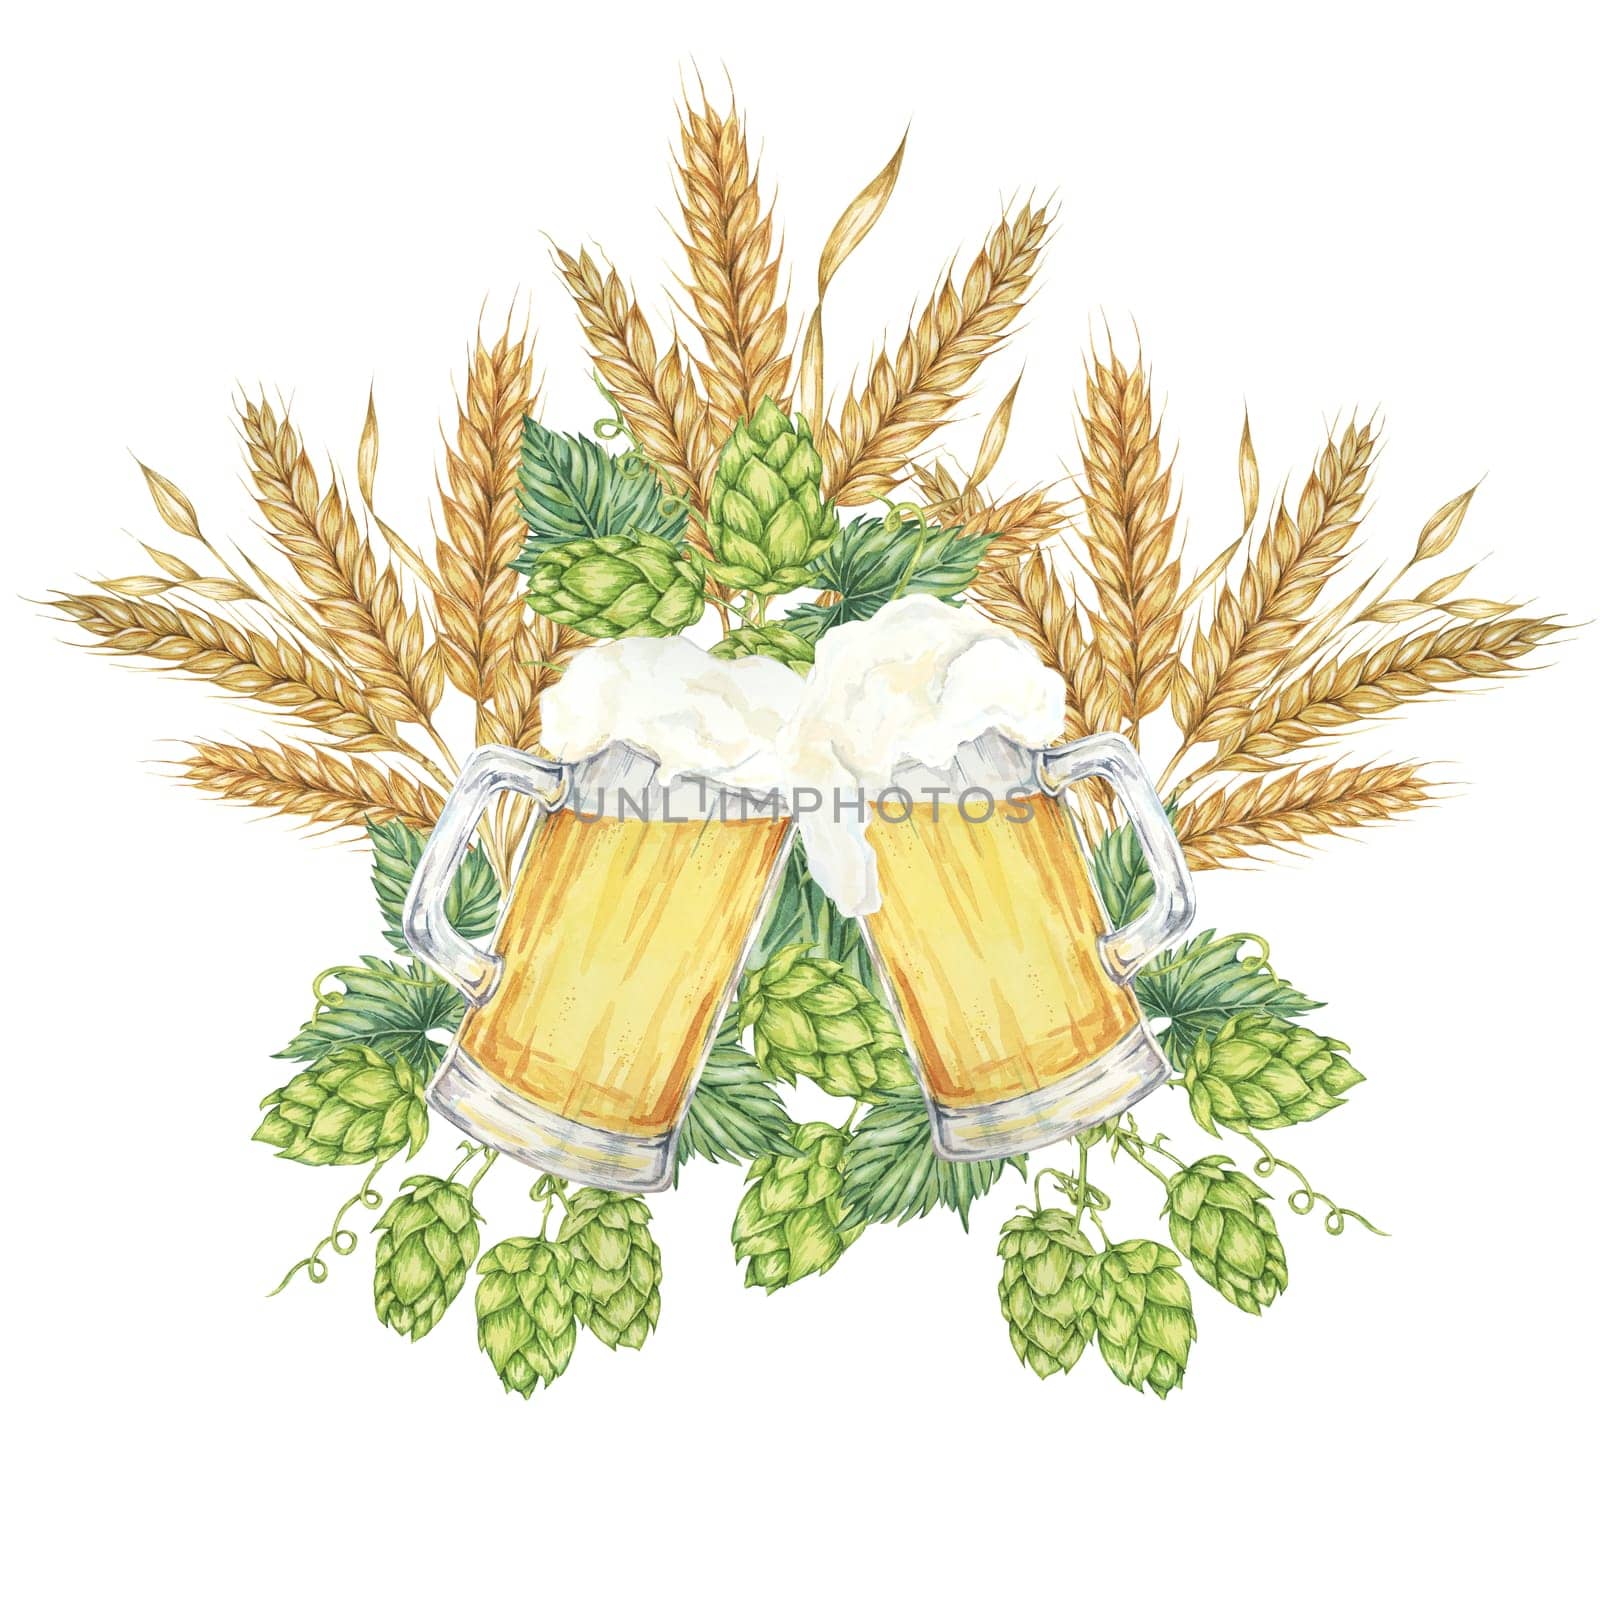 Cheers with beer mugs with light lager beer surrounded by barley ears, wheat stalks and green hops. Oktoberfest composition in watercolor. Clipart for festive designs, card, brewery, flyer, coaster